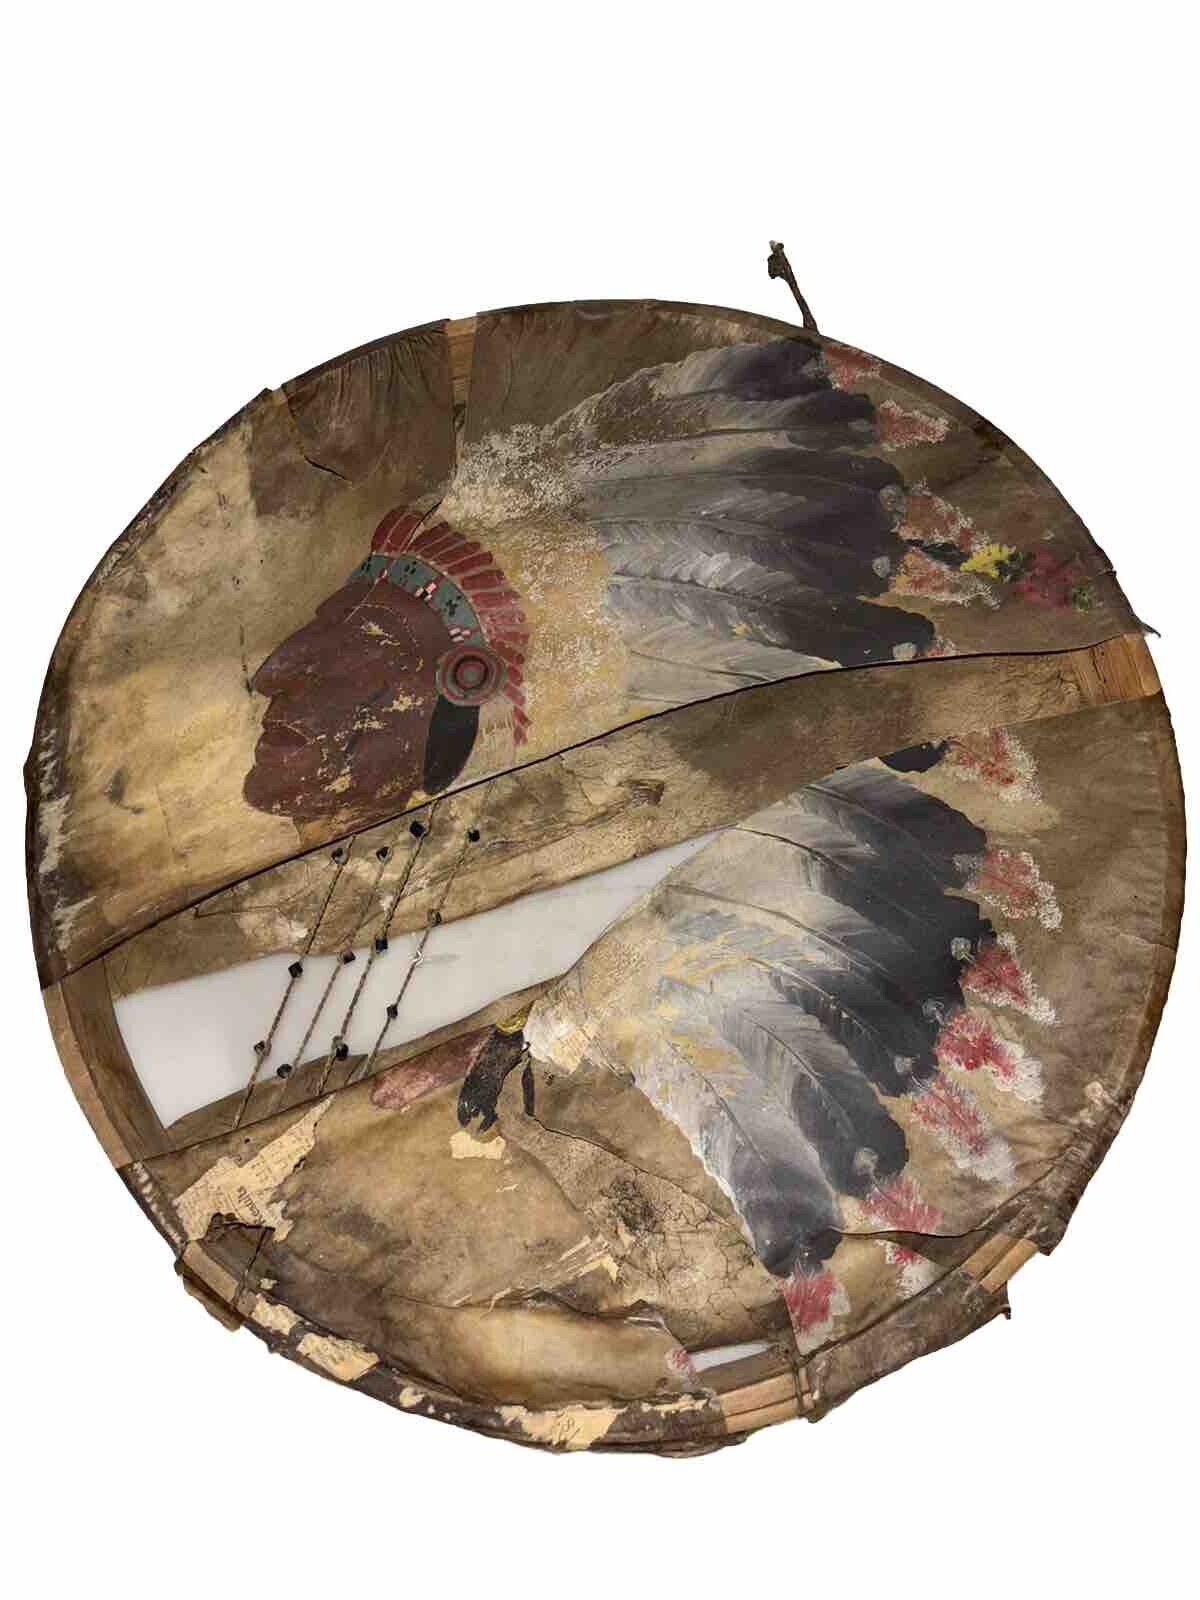 Antique Native American Indian Hand Painted Drum Circa Late 1800s